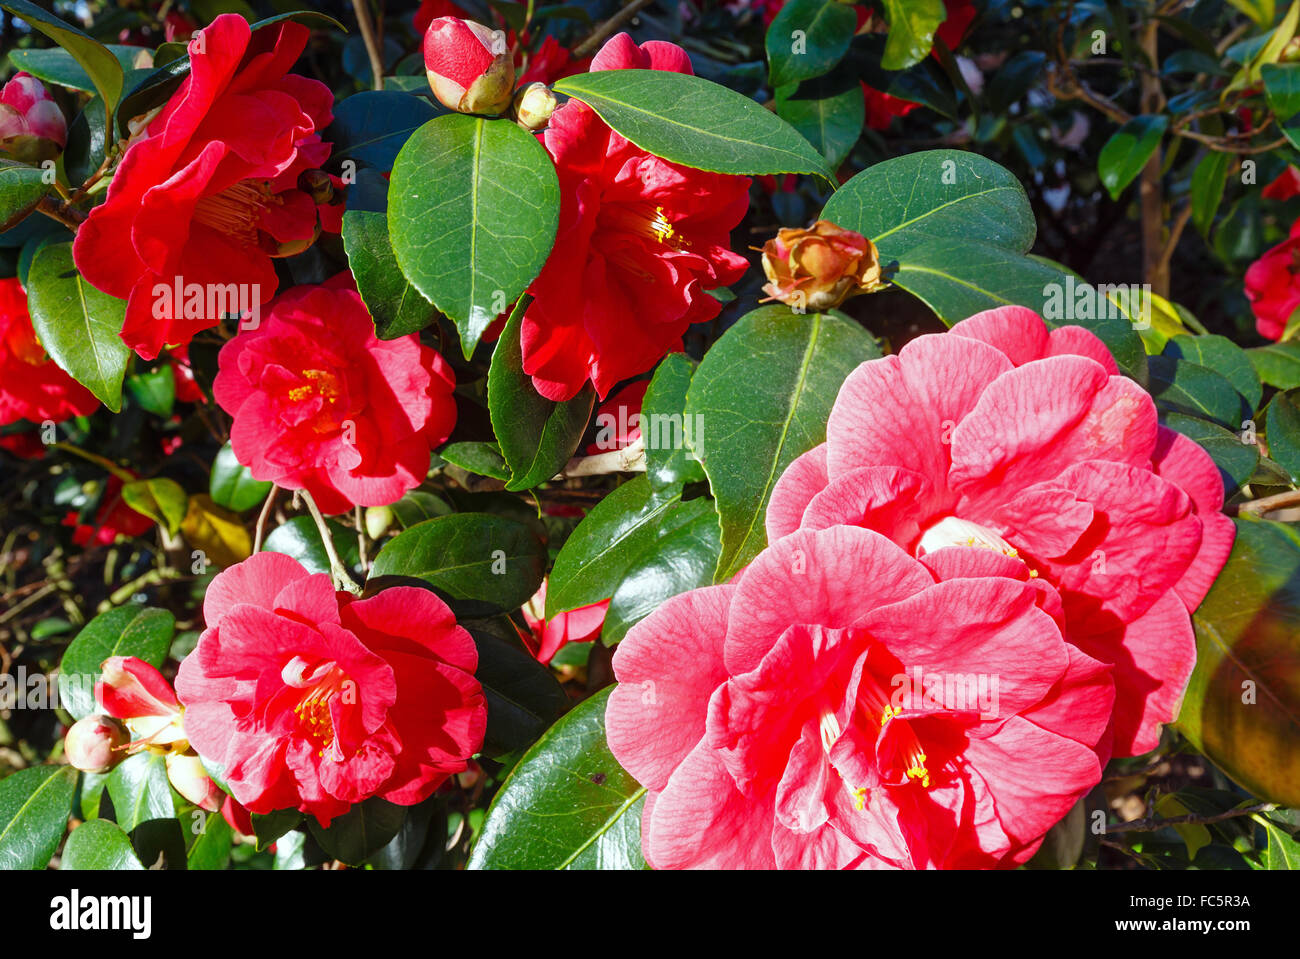 Blossoming Camellia bush with red flowers. Stock Photo